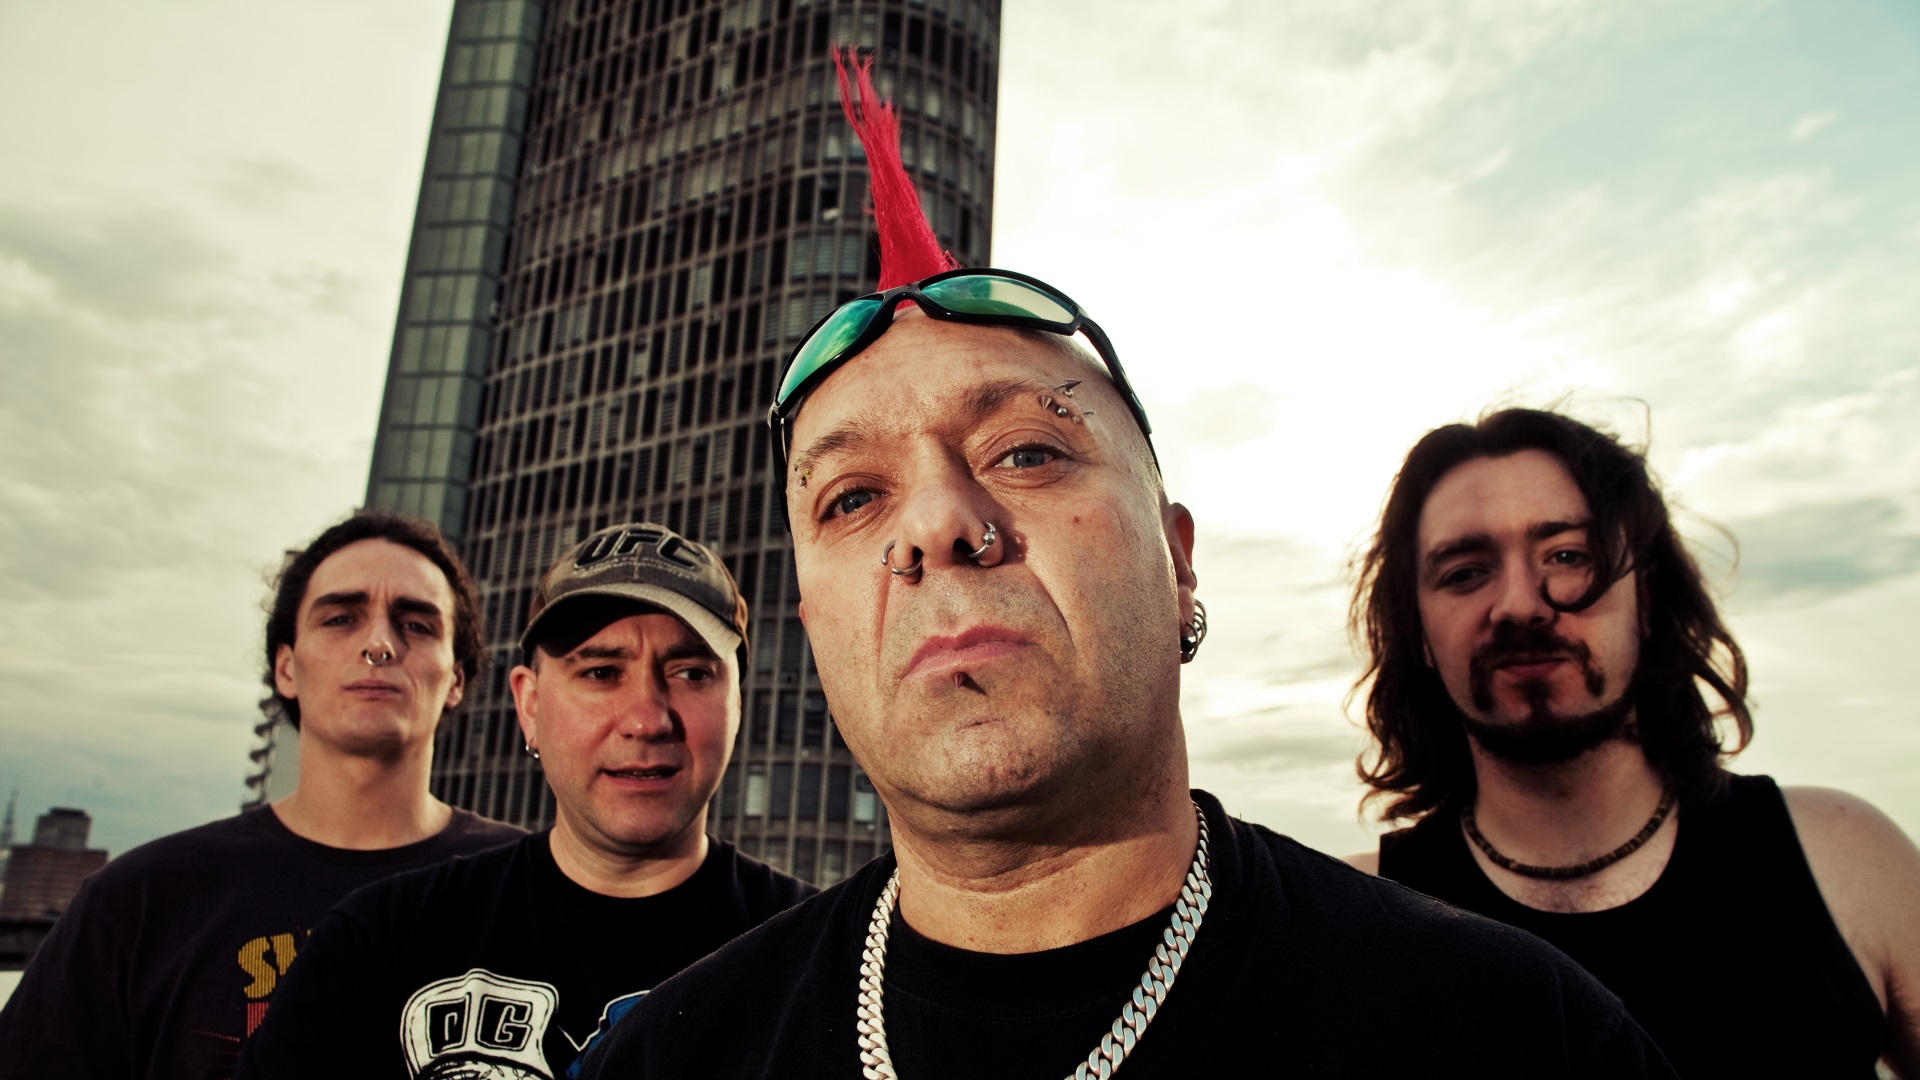 The Exploited Wallpapers